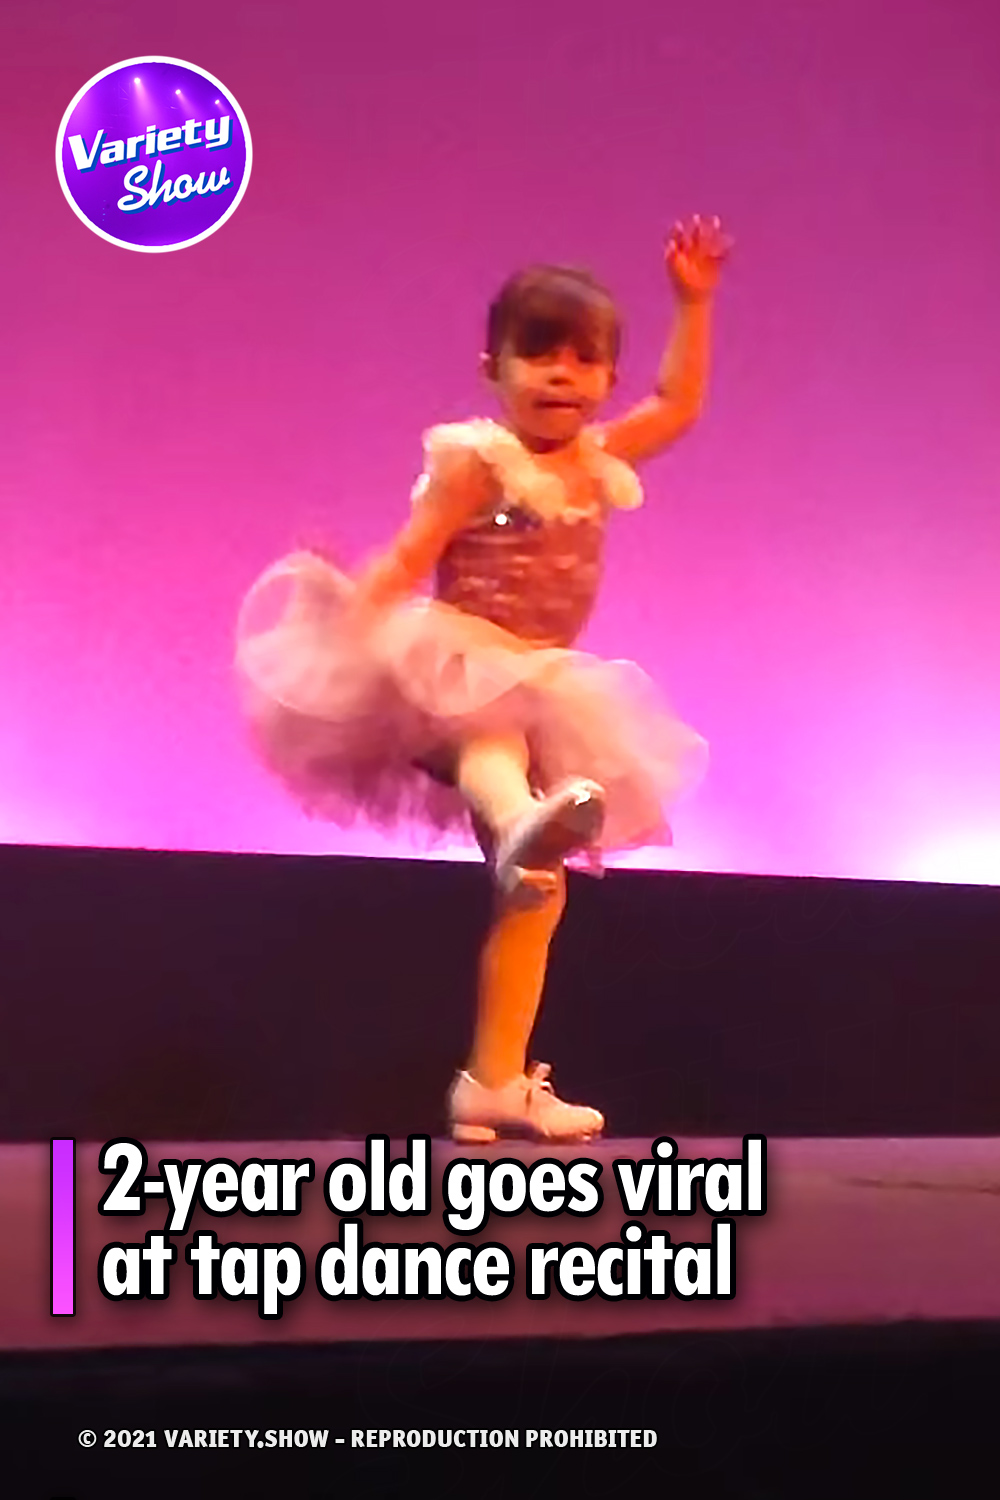 2-year old goes viral at tap dance recital